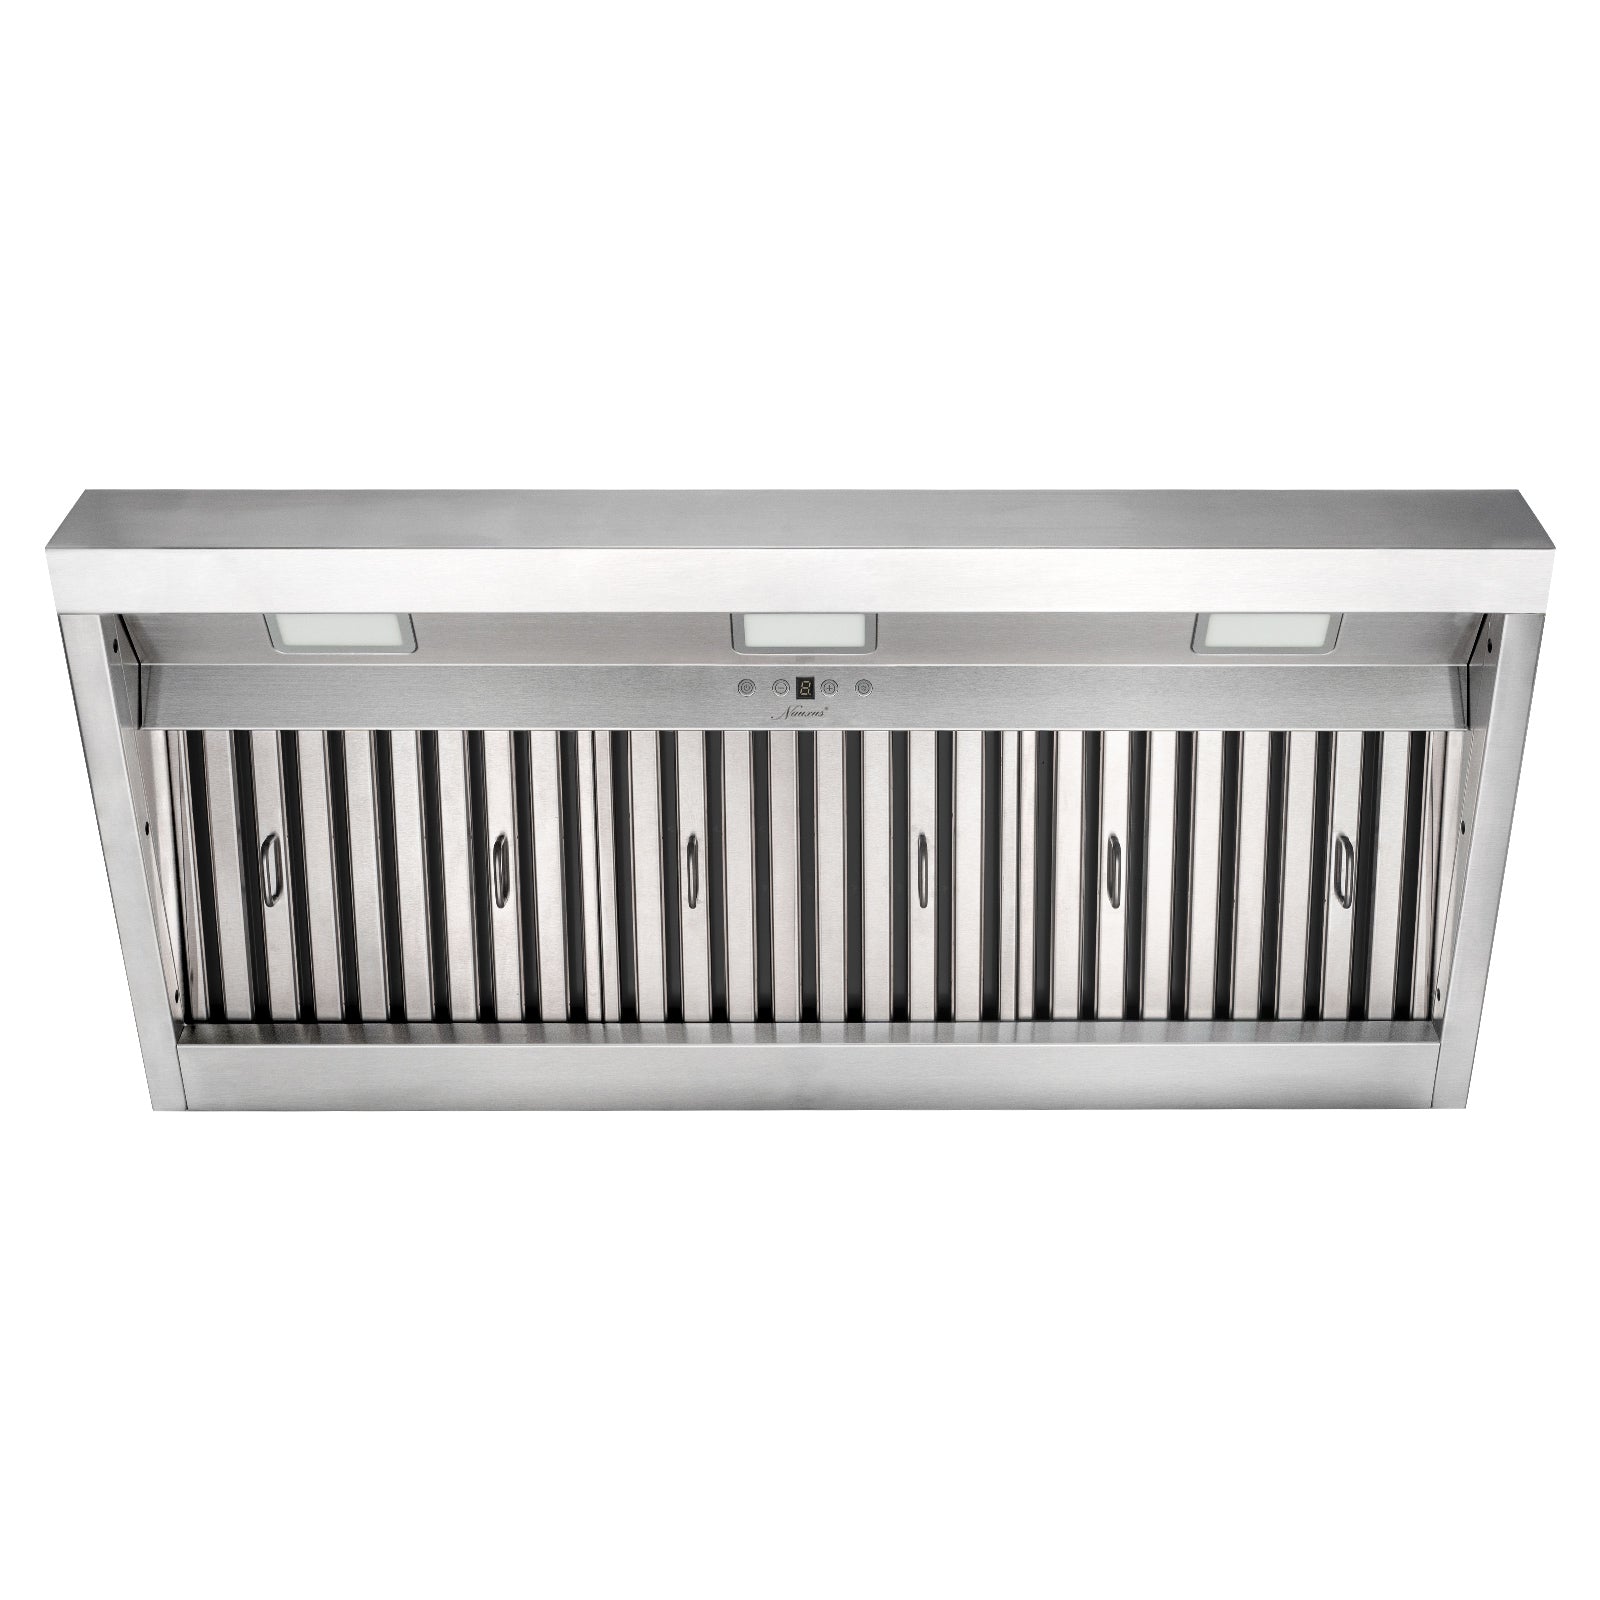 Range Hood Insert 42 Inch, 1200 CFM Built-in Kitchen Hood with 4 Speeds, Ultra-Quiet Stainless Steel Ducted Vent Hood Insert with Dimmable LED Lights and Dishwasher Safe Filter